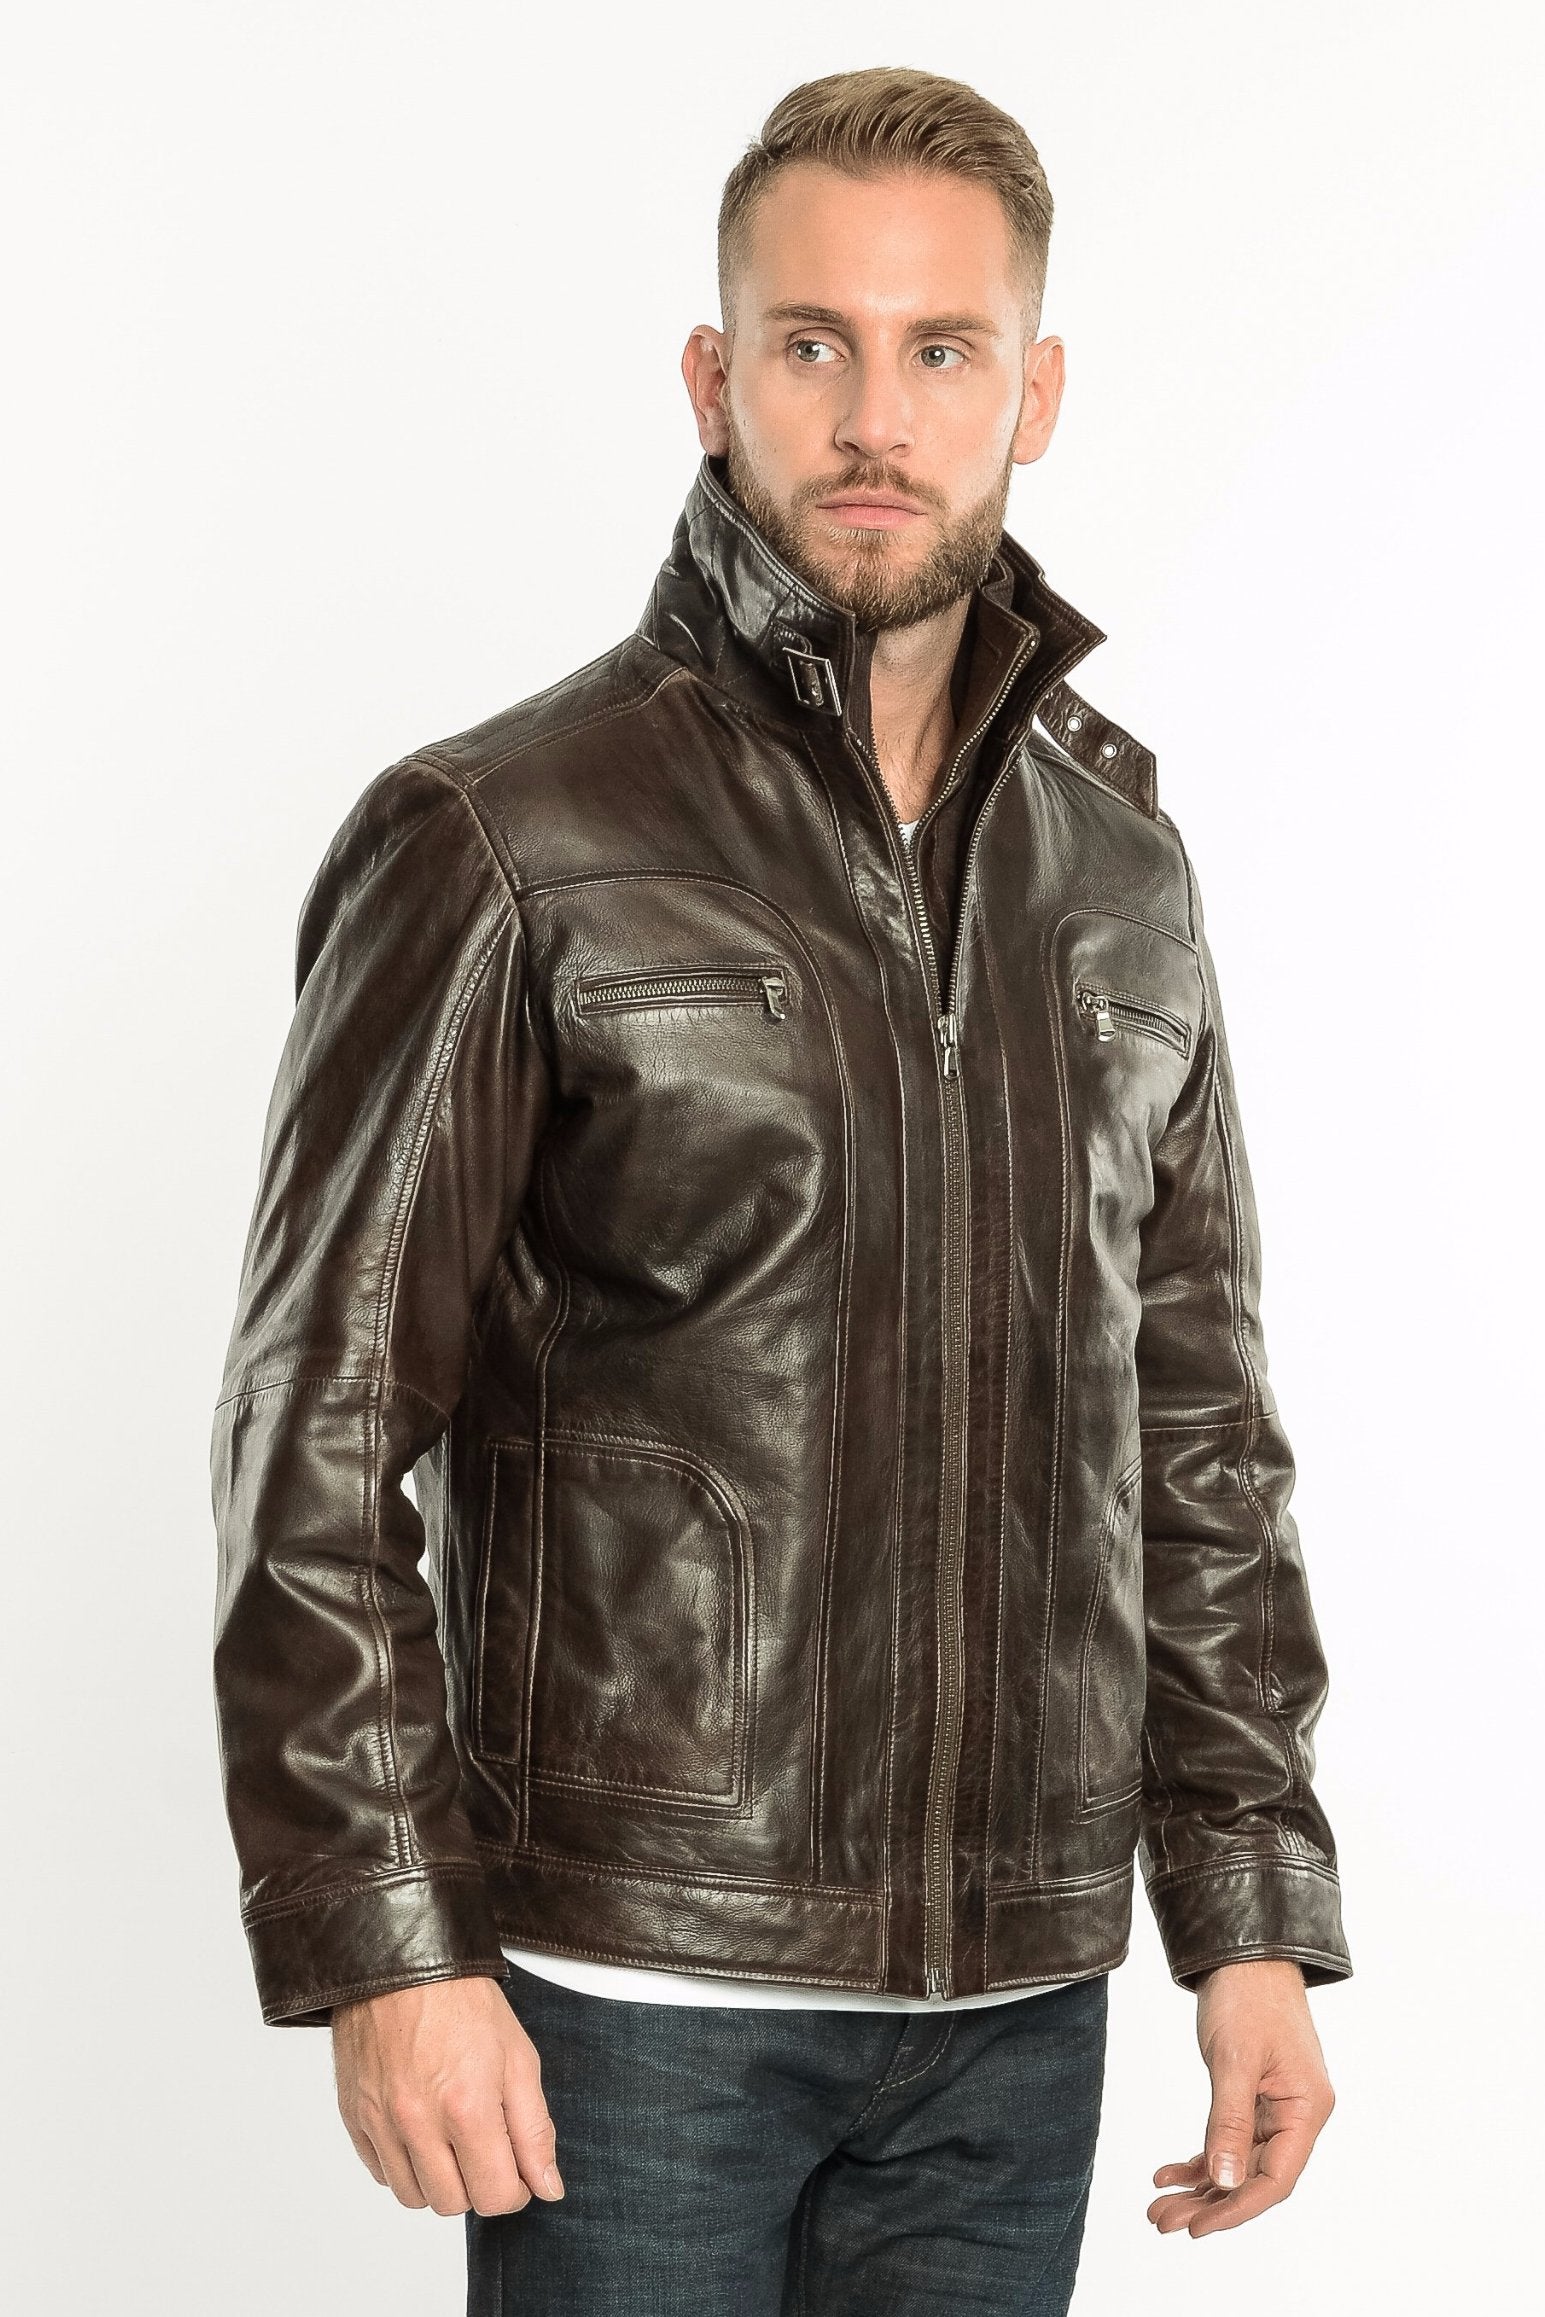 Regency by LaMarque - Double Collar Leather Jacket - MEMPHIS-B ...